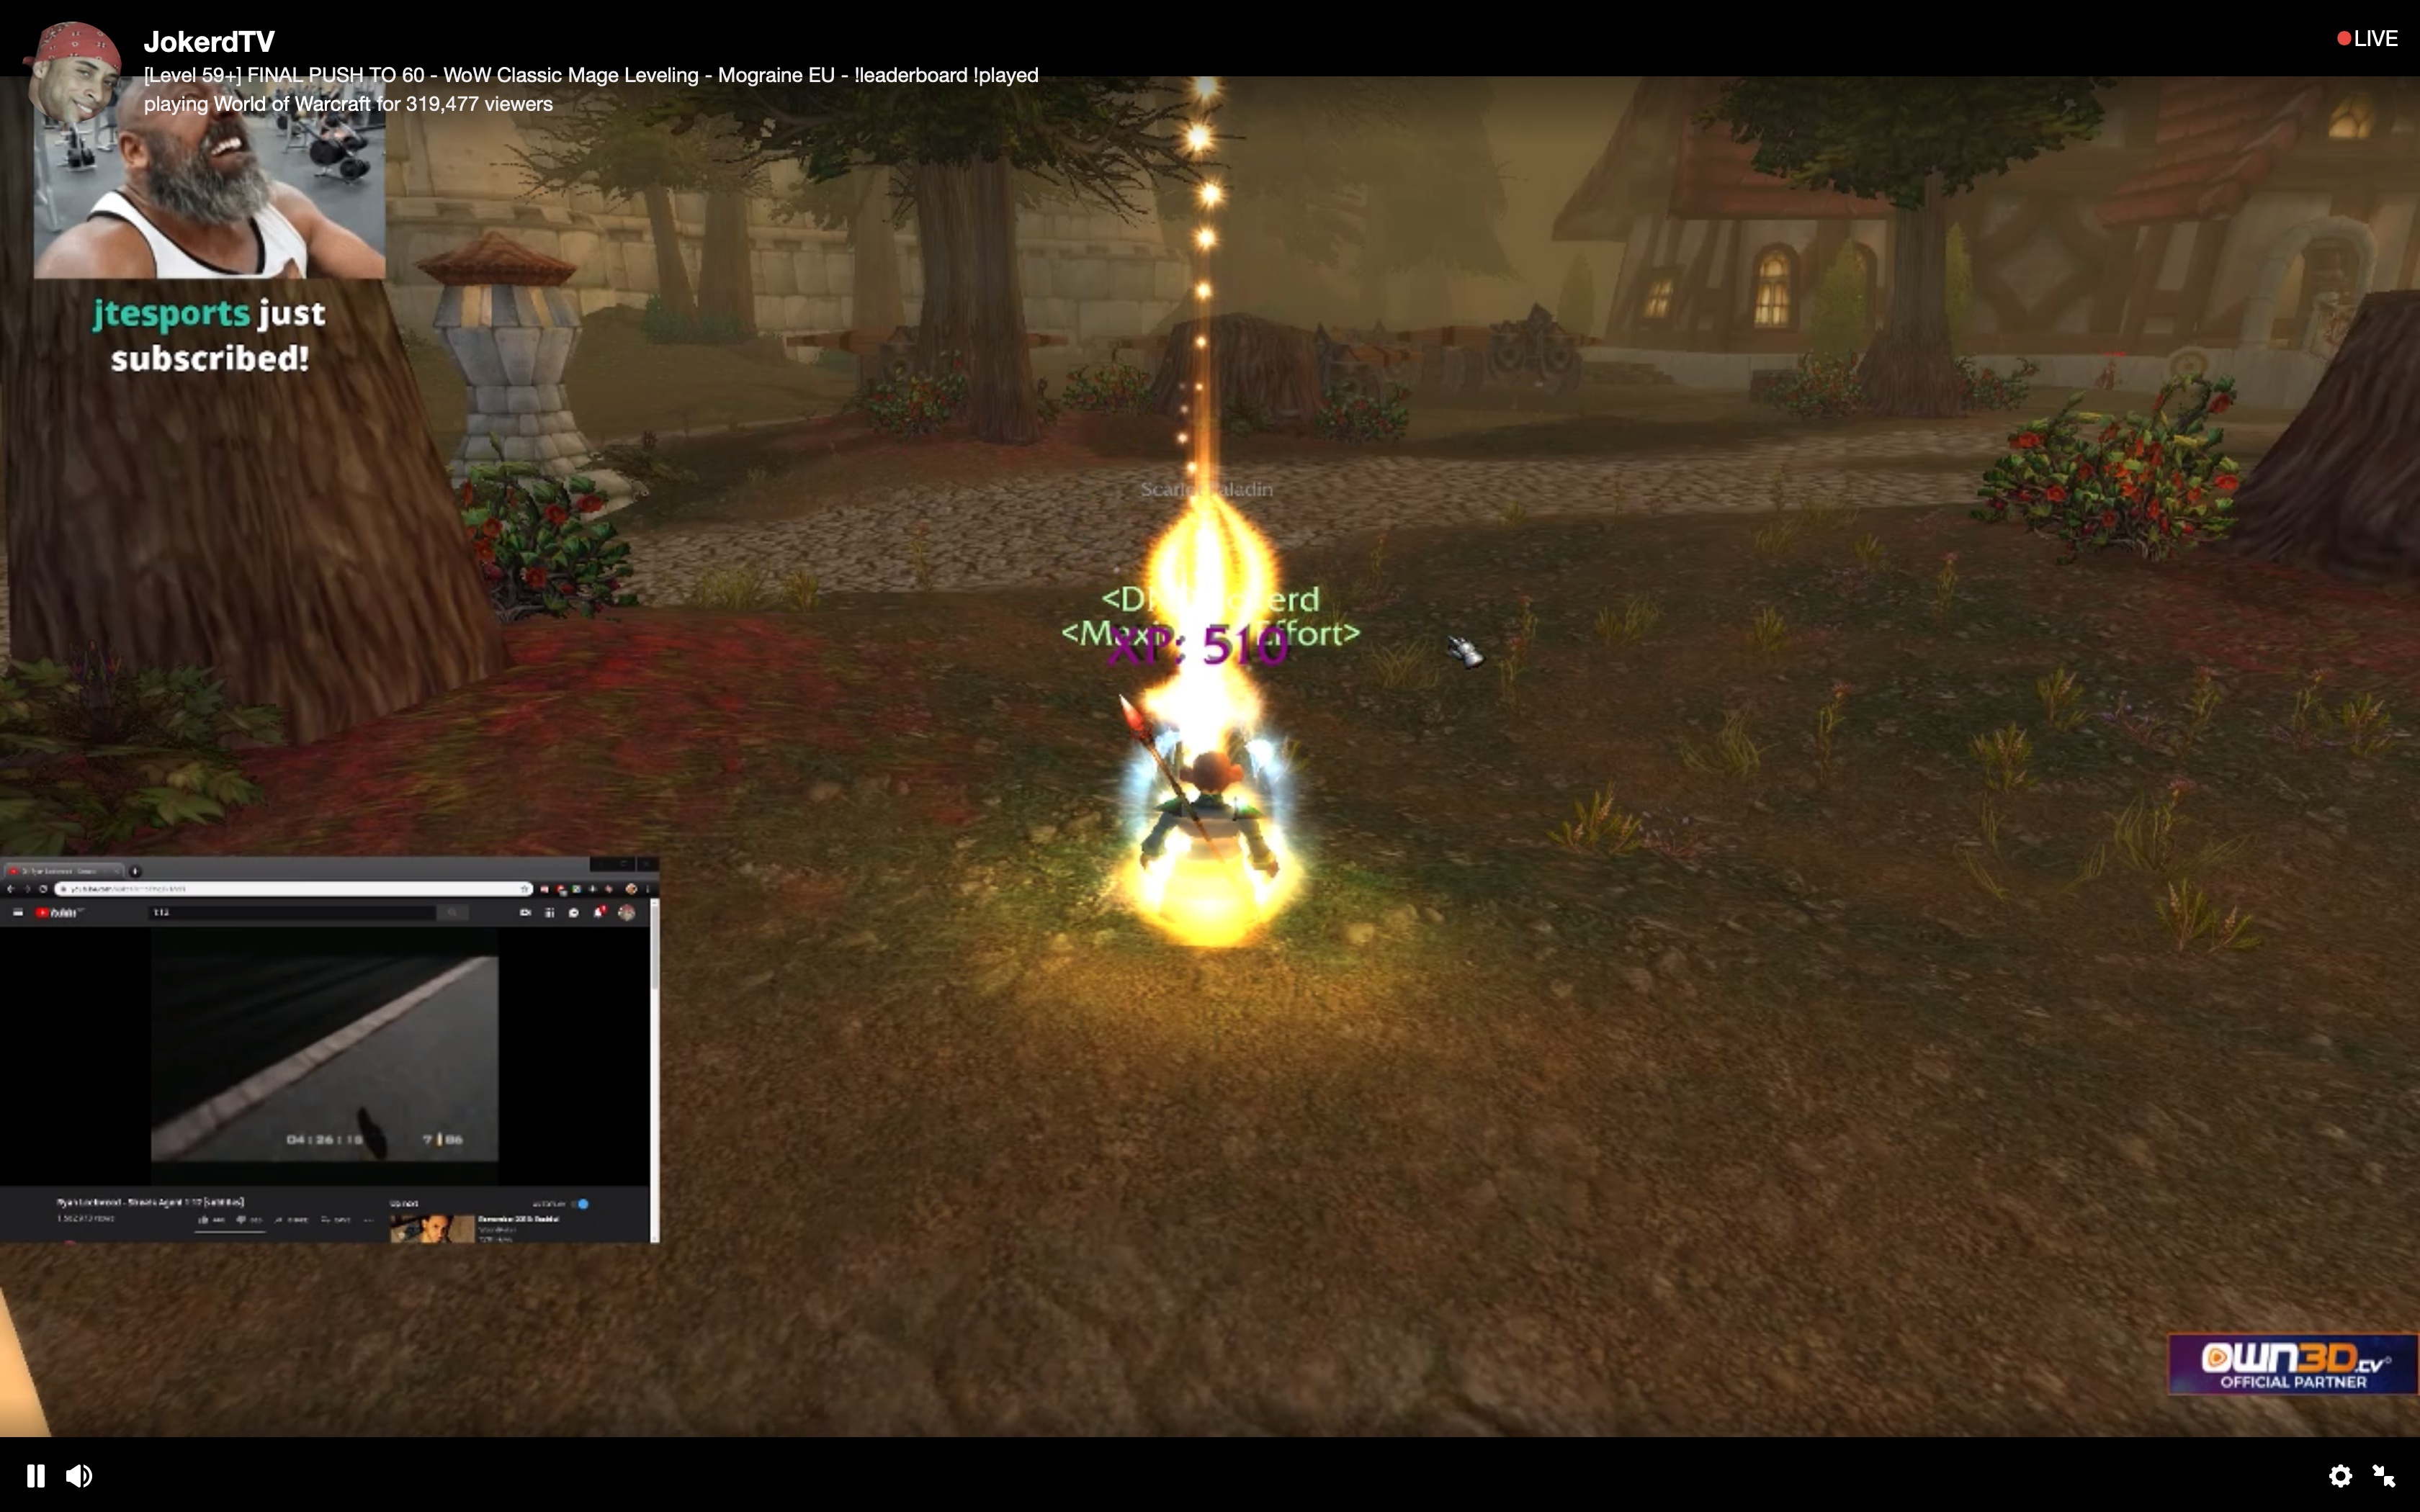 Classic World First Level 60 Is Jokerd - Mage AoE Leveling Build - Wowhead News